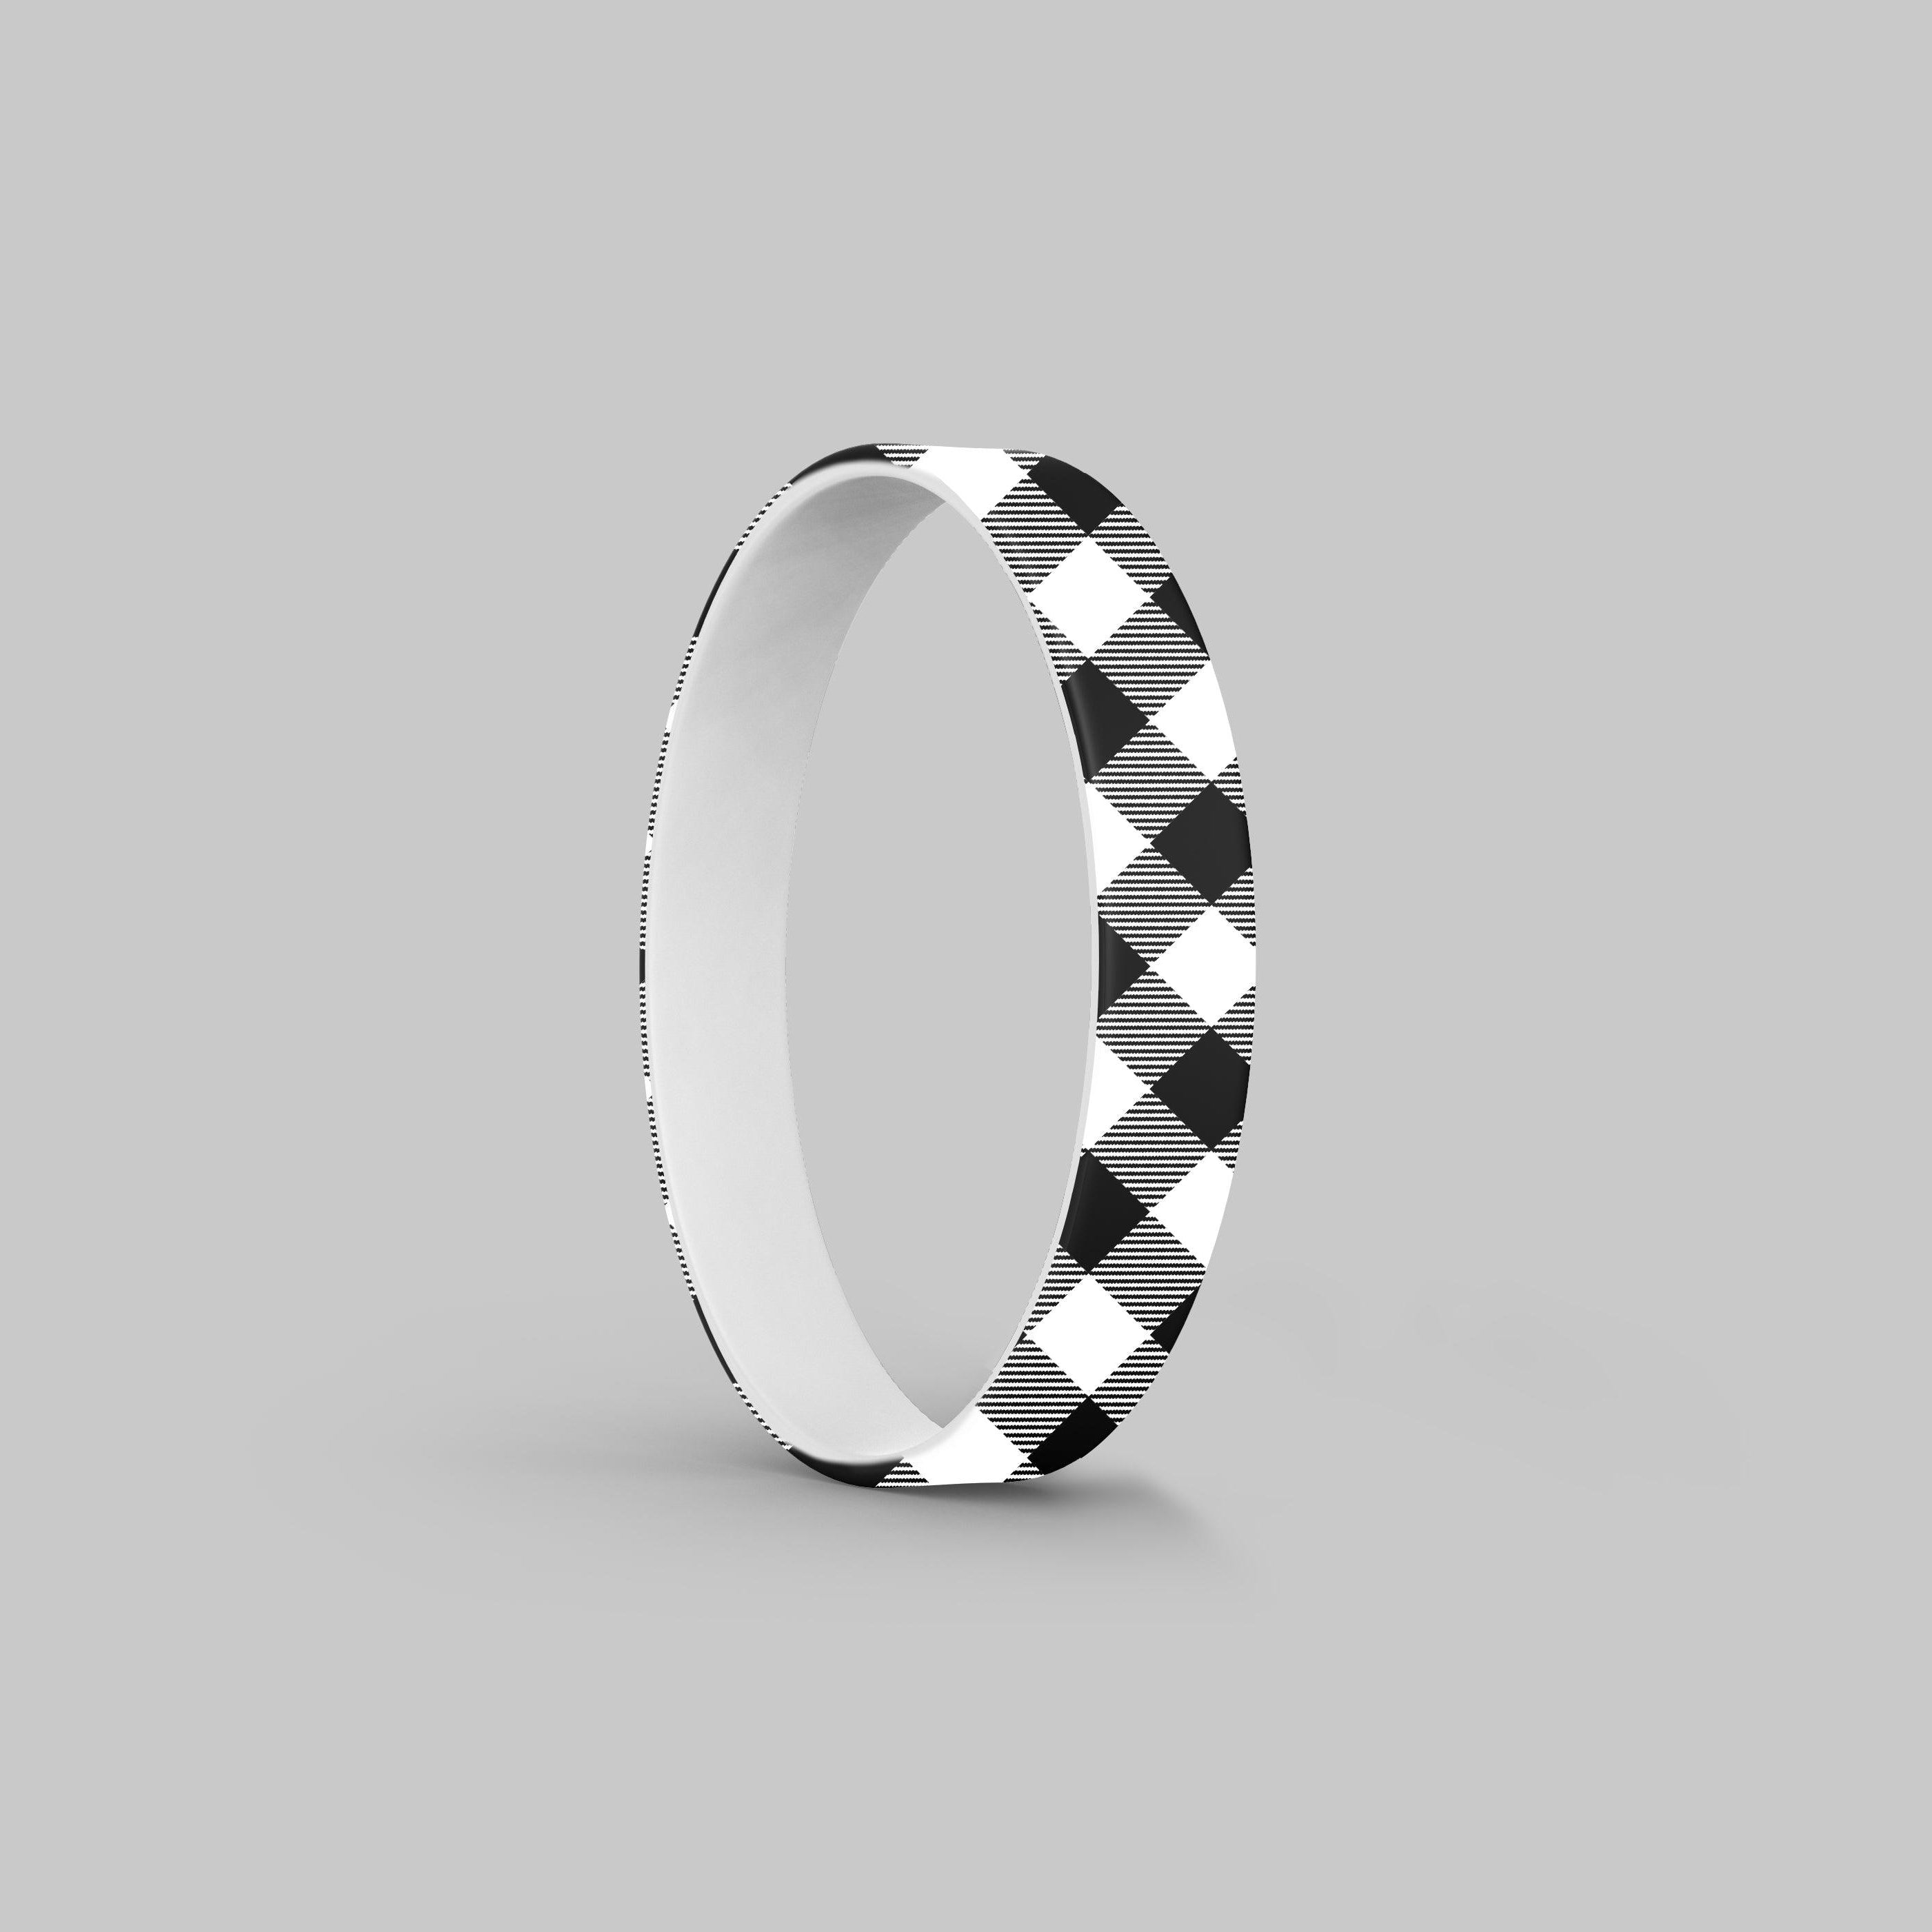 Bull Plaid Silicone Bracelet Stack Two Colors Available - Fancy Bands 